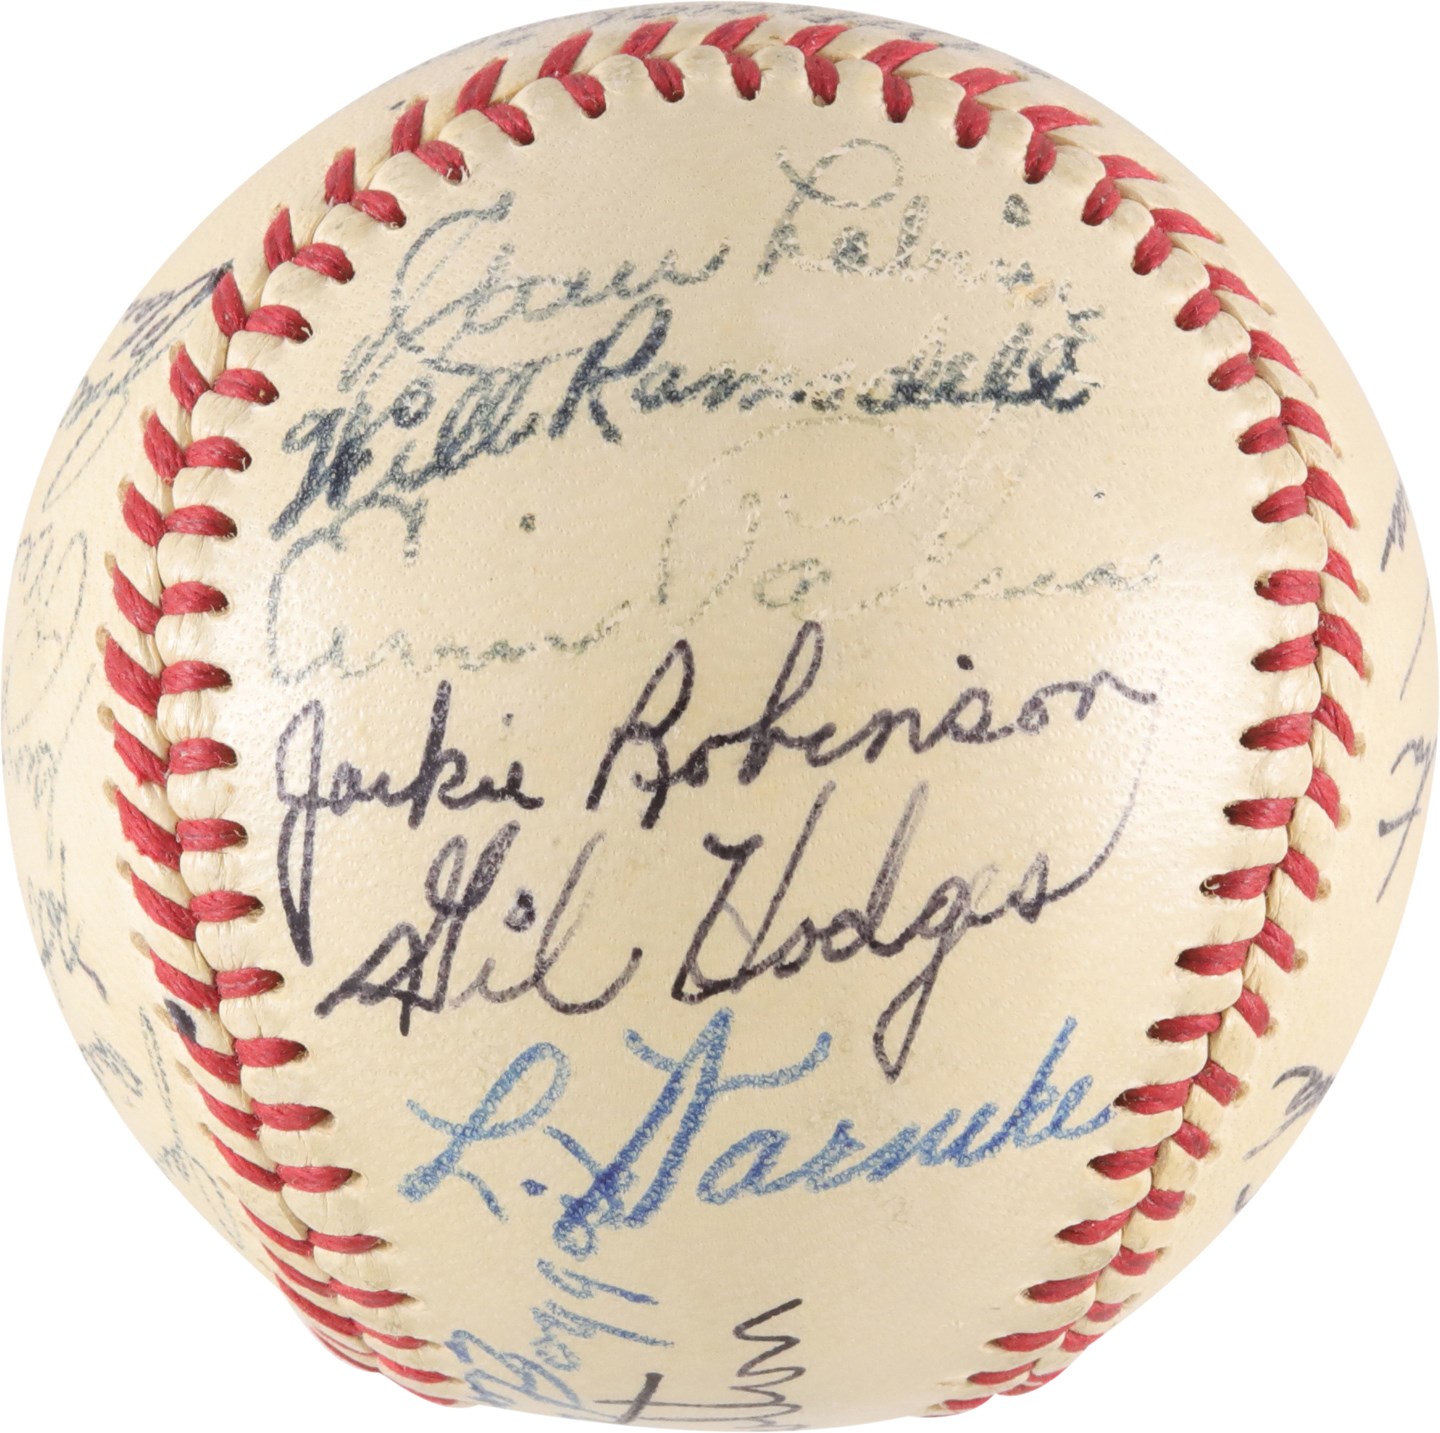 Baseball Autographs - 1950 Brooklyn Dodgers Team-Signed Ball - Twice Signed by Jackie Robinson (PSA)